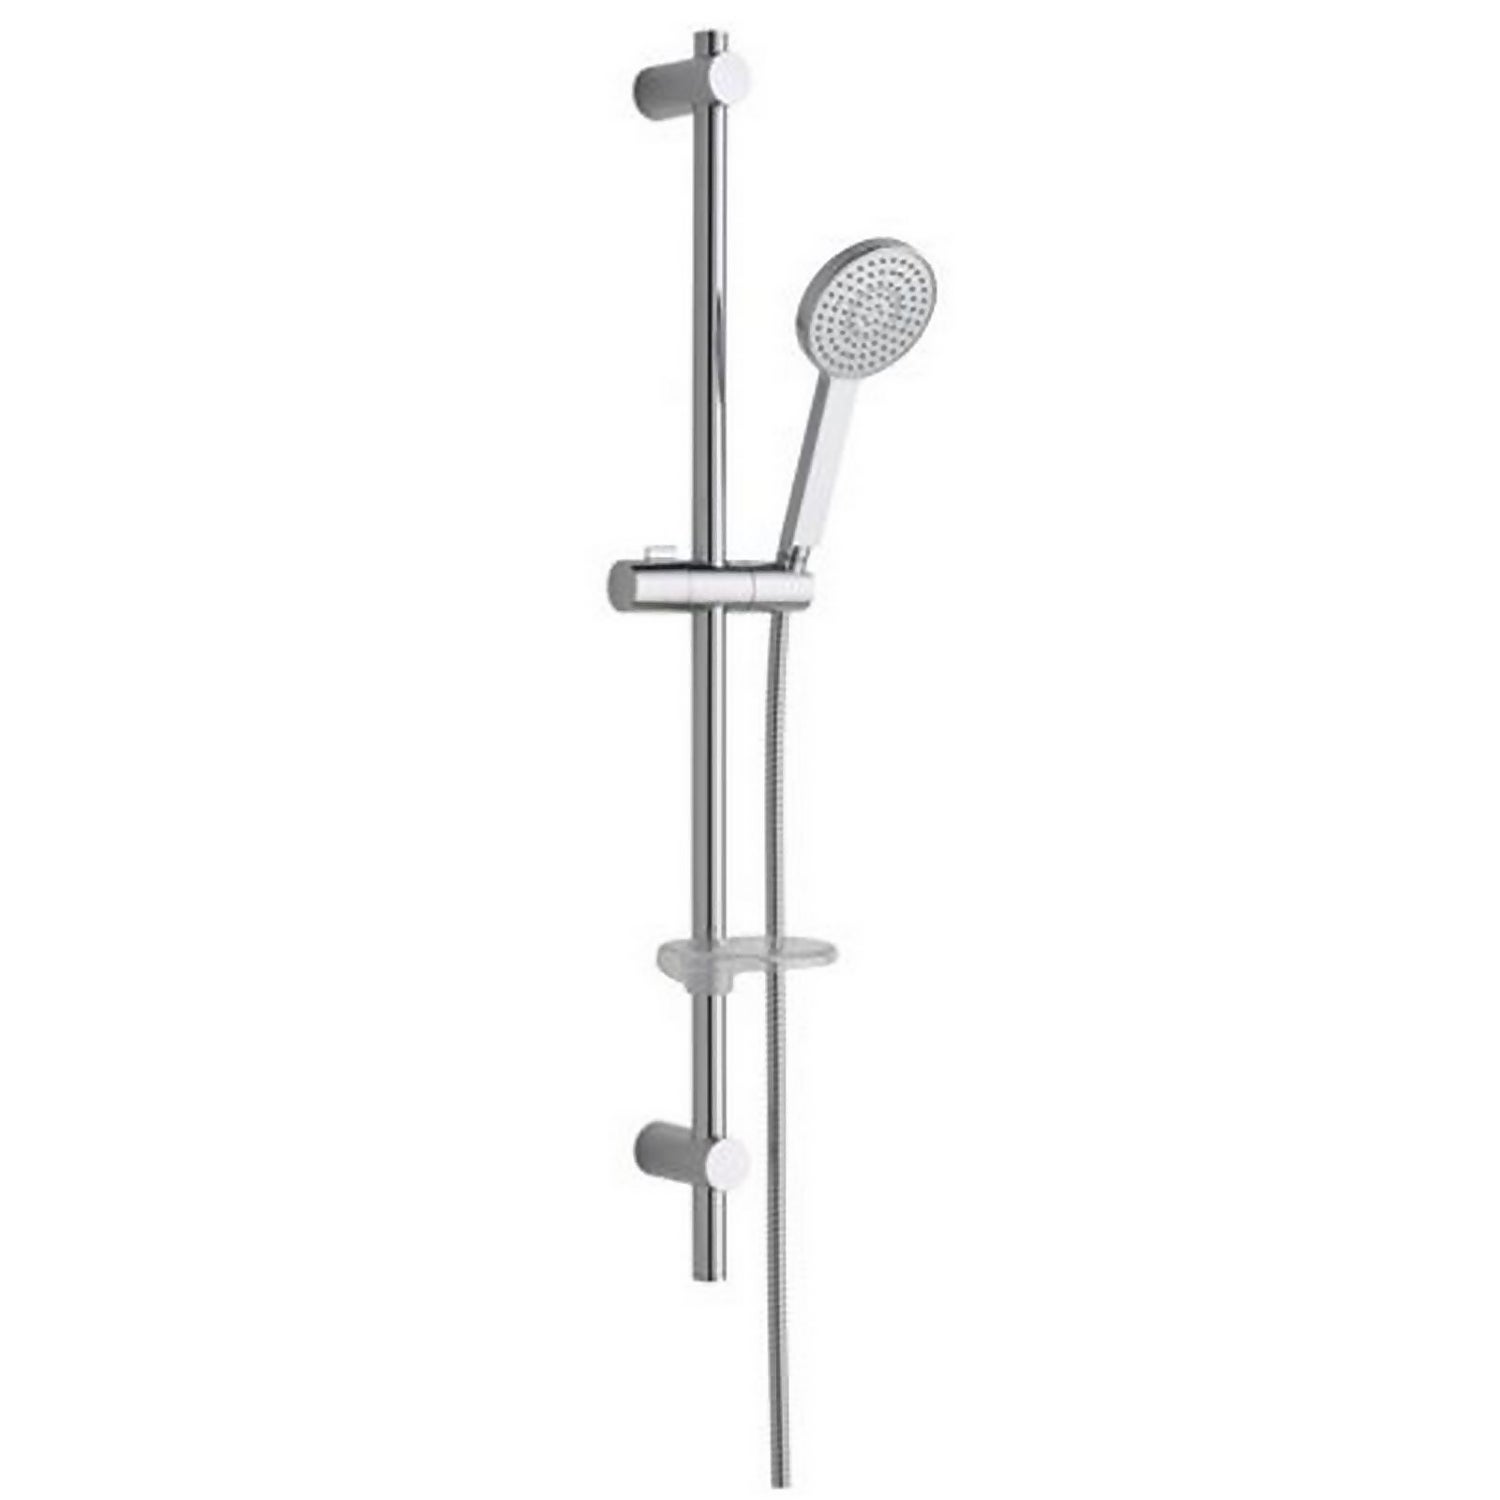 Pure Airdrop 105mm Multi Function Shower Head and Riser Rail Kit - Chrome